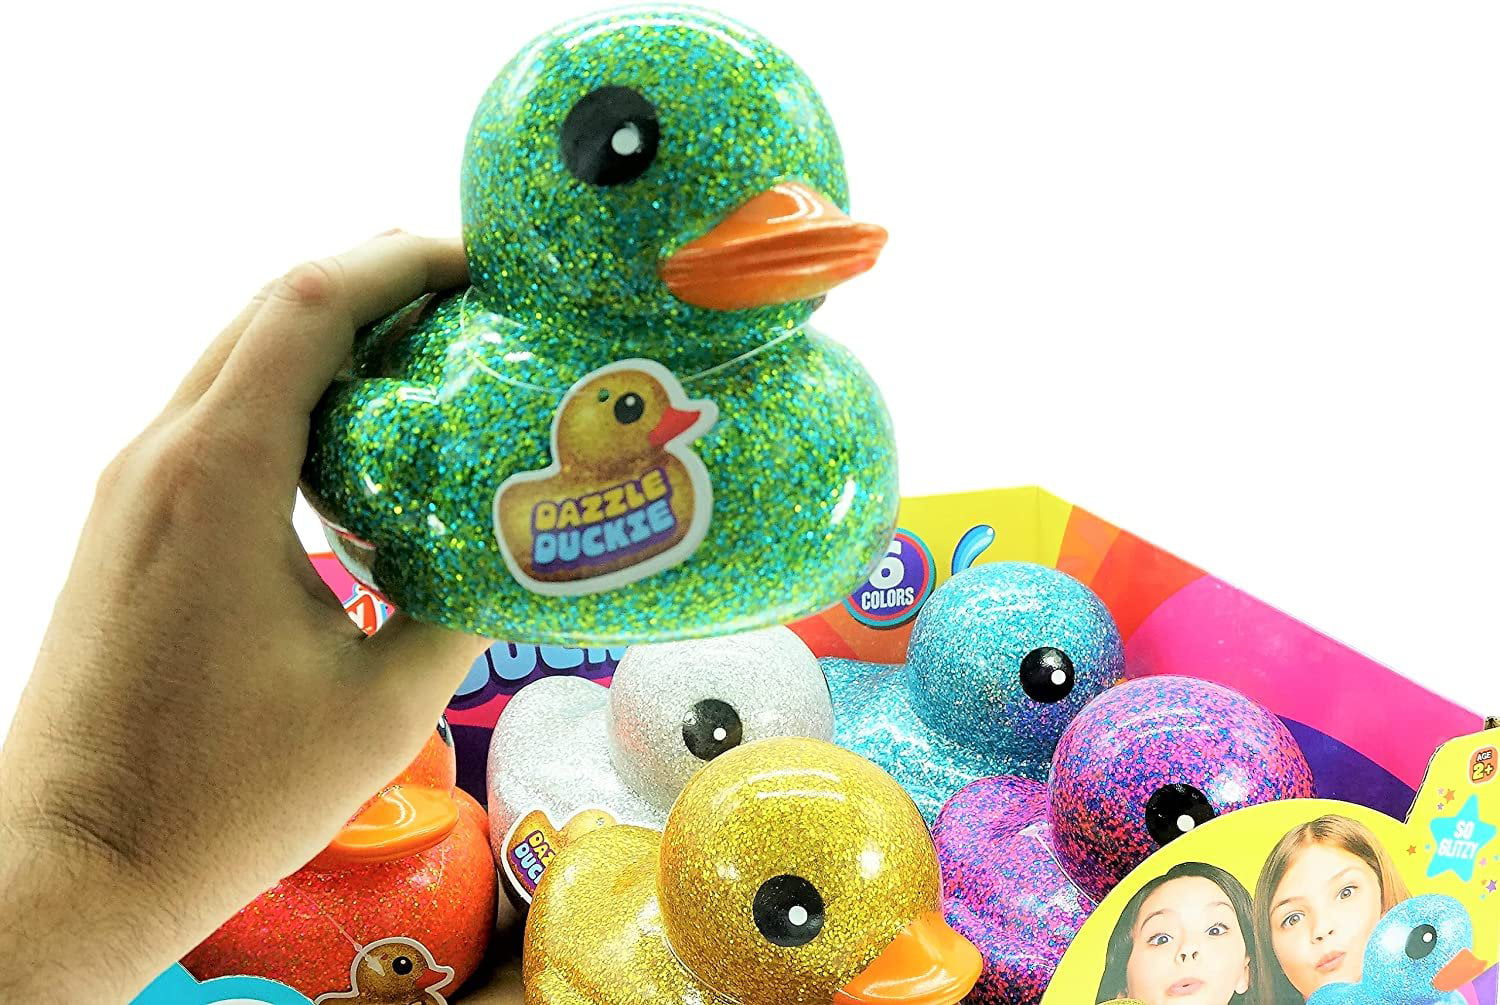 PINK SPARKLE RUBBER DUCK X1 NONE TOXIC A GREAT BATHROOM FEATURE. 